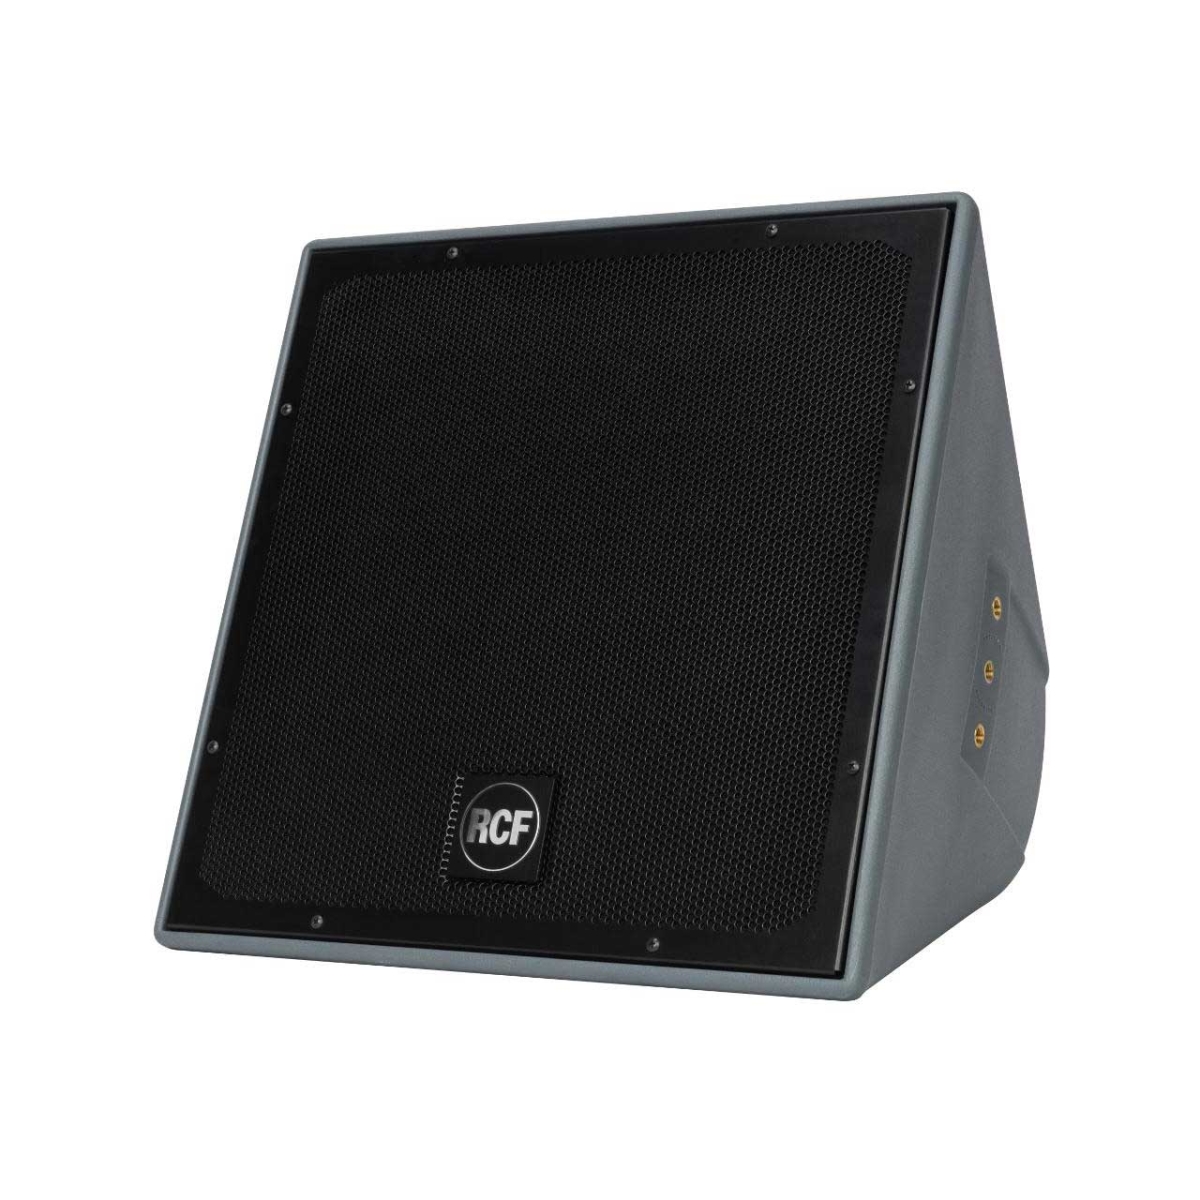 Picture of RCF USA RCF-P8015S 15 in. Outdoor IP55 Weatherproof Bass Reflex Subwoofer - 8 ohm - 800W RMS - Black